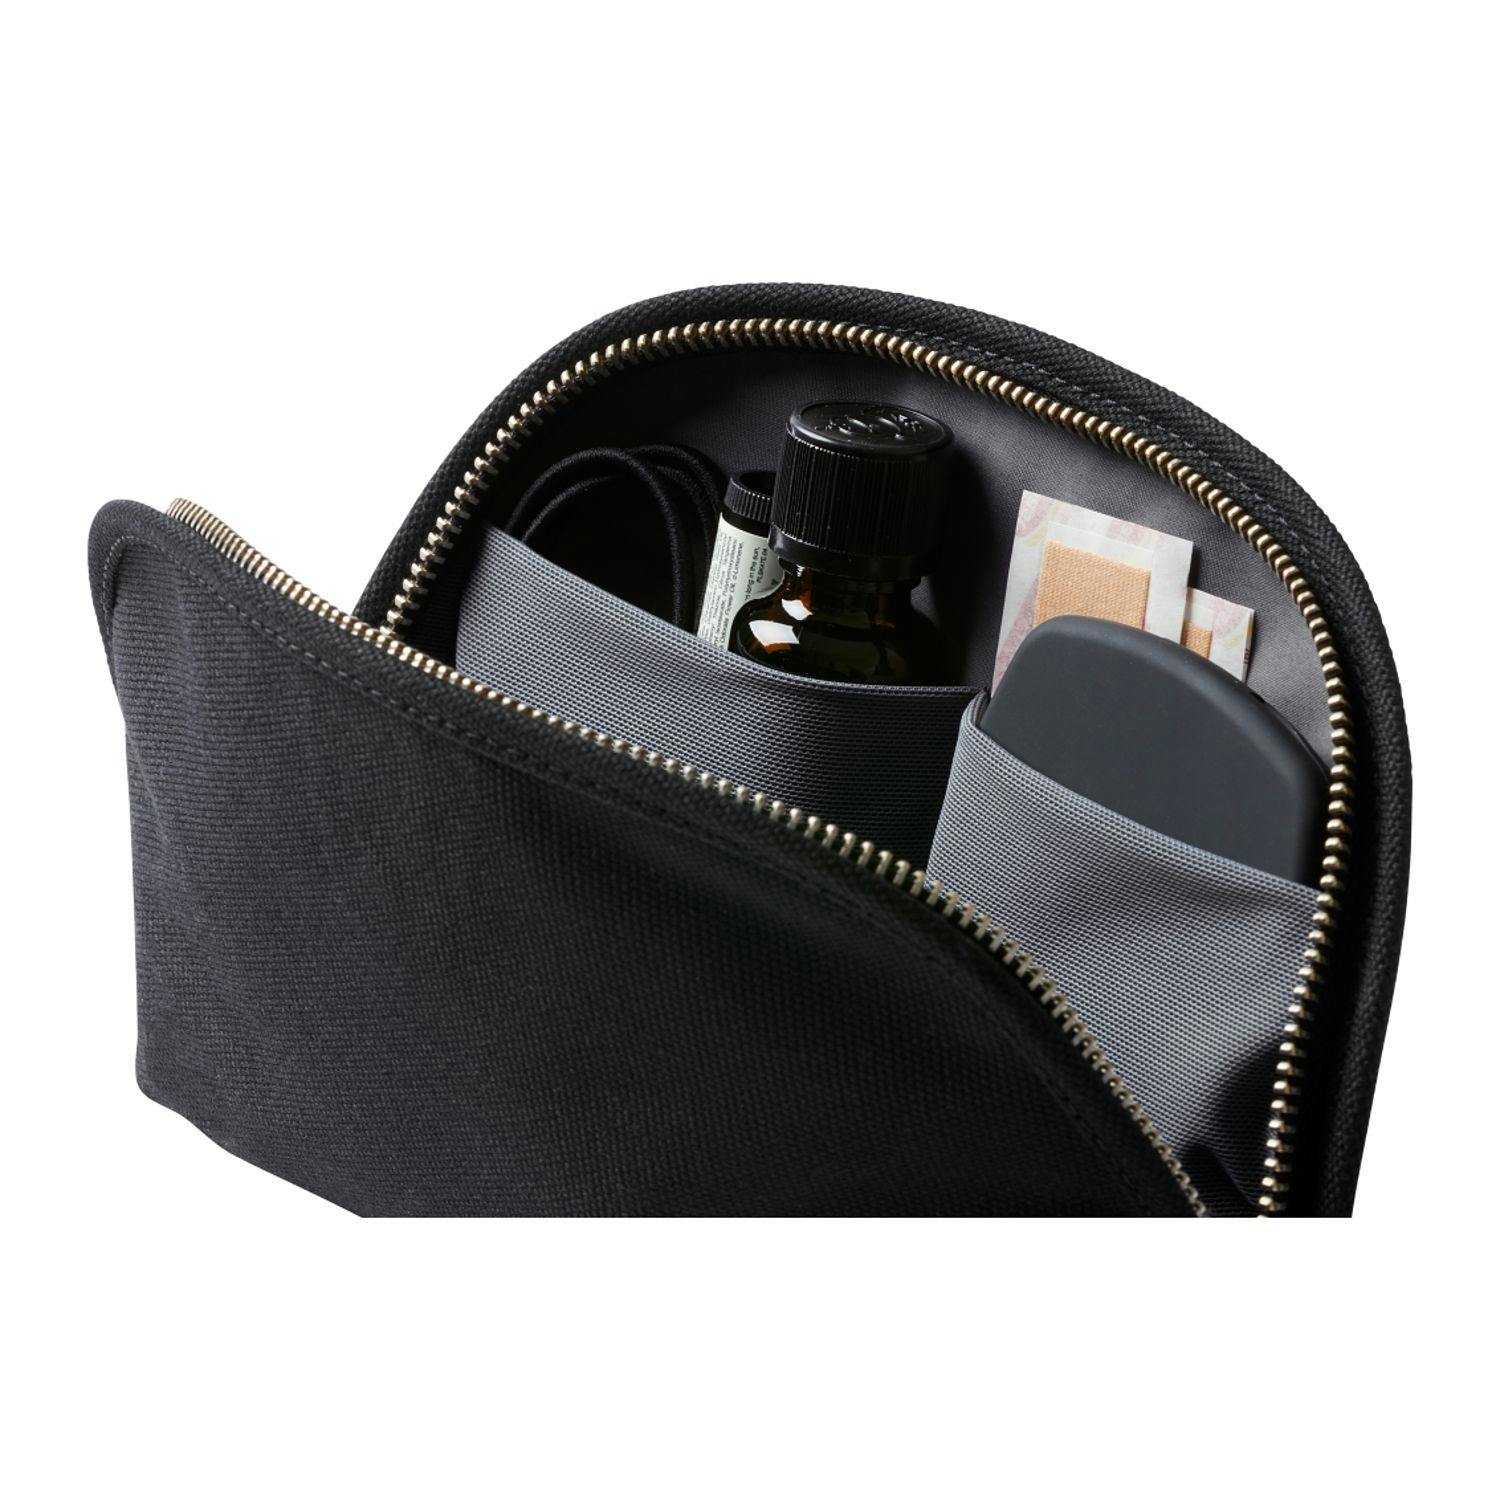 Bellroy Classic Pouch - additional Image 4